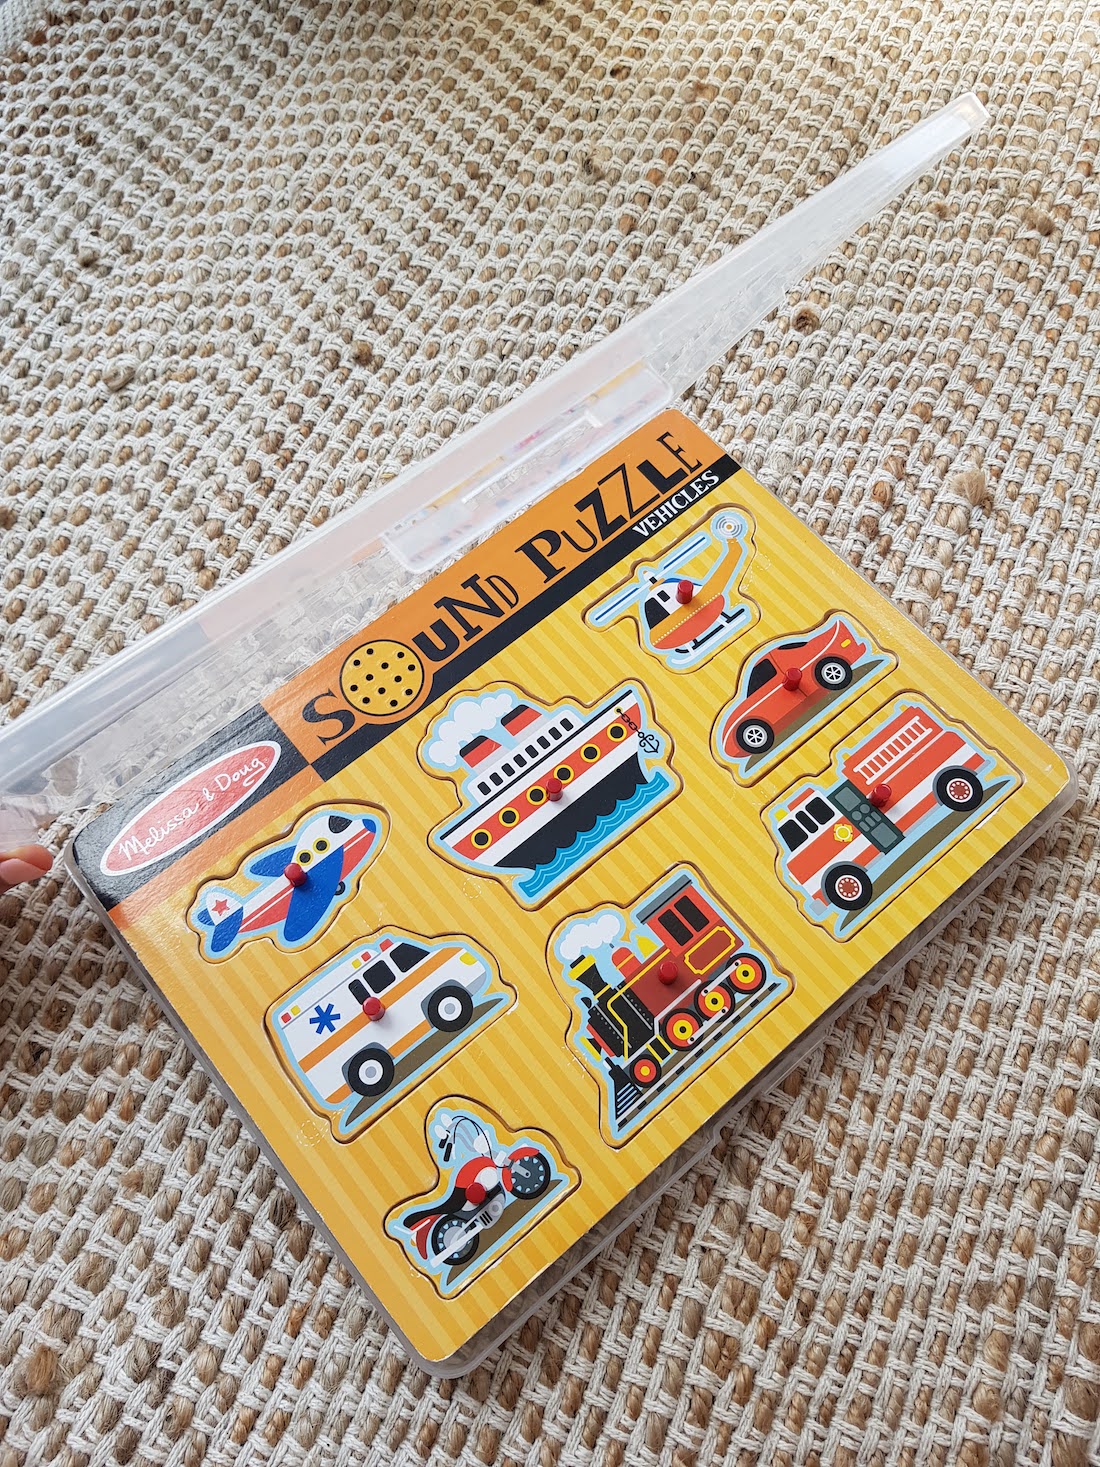 Storing puzzles in plastic A4 document holder